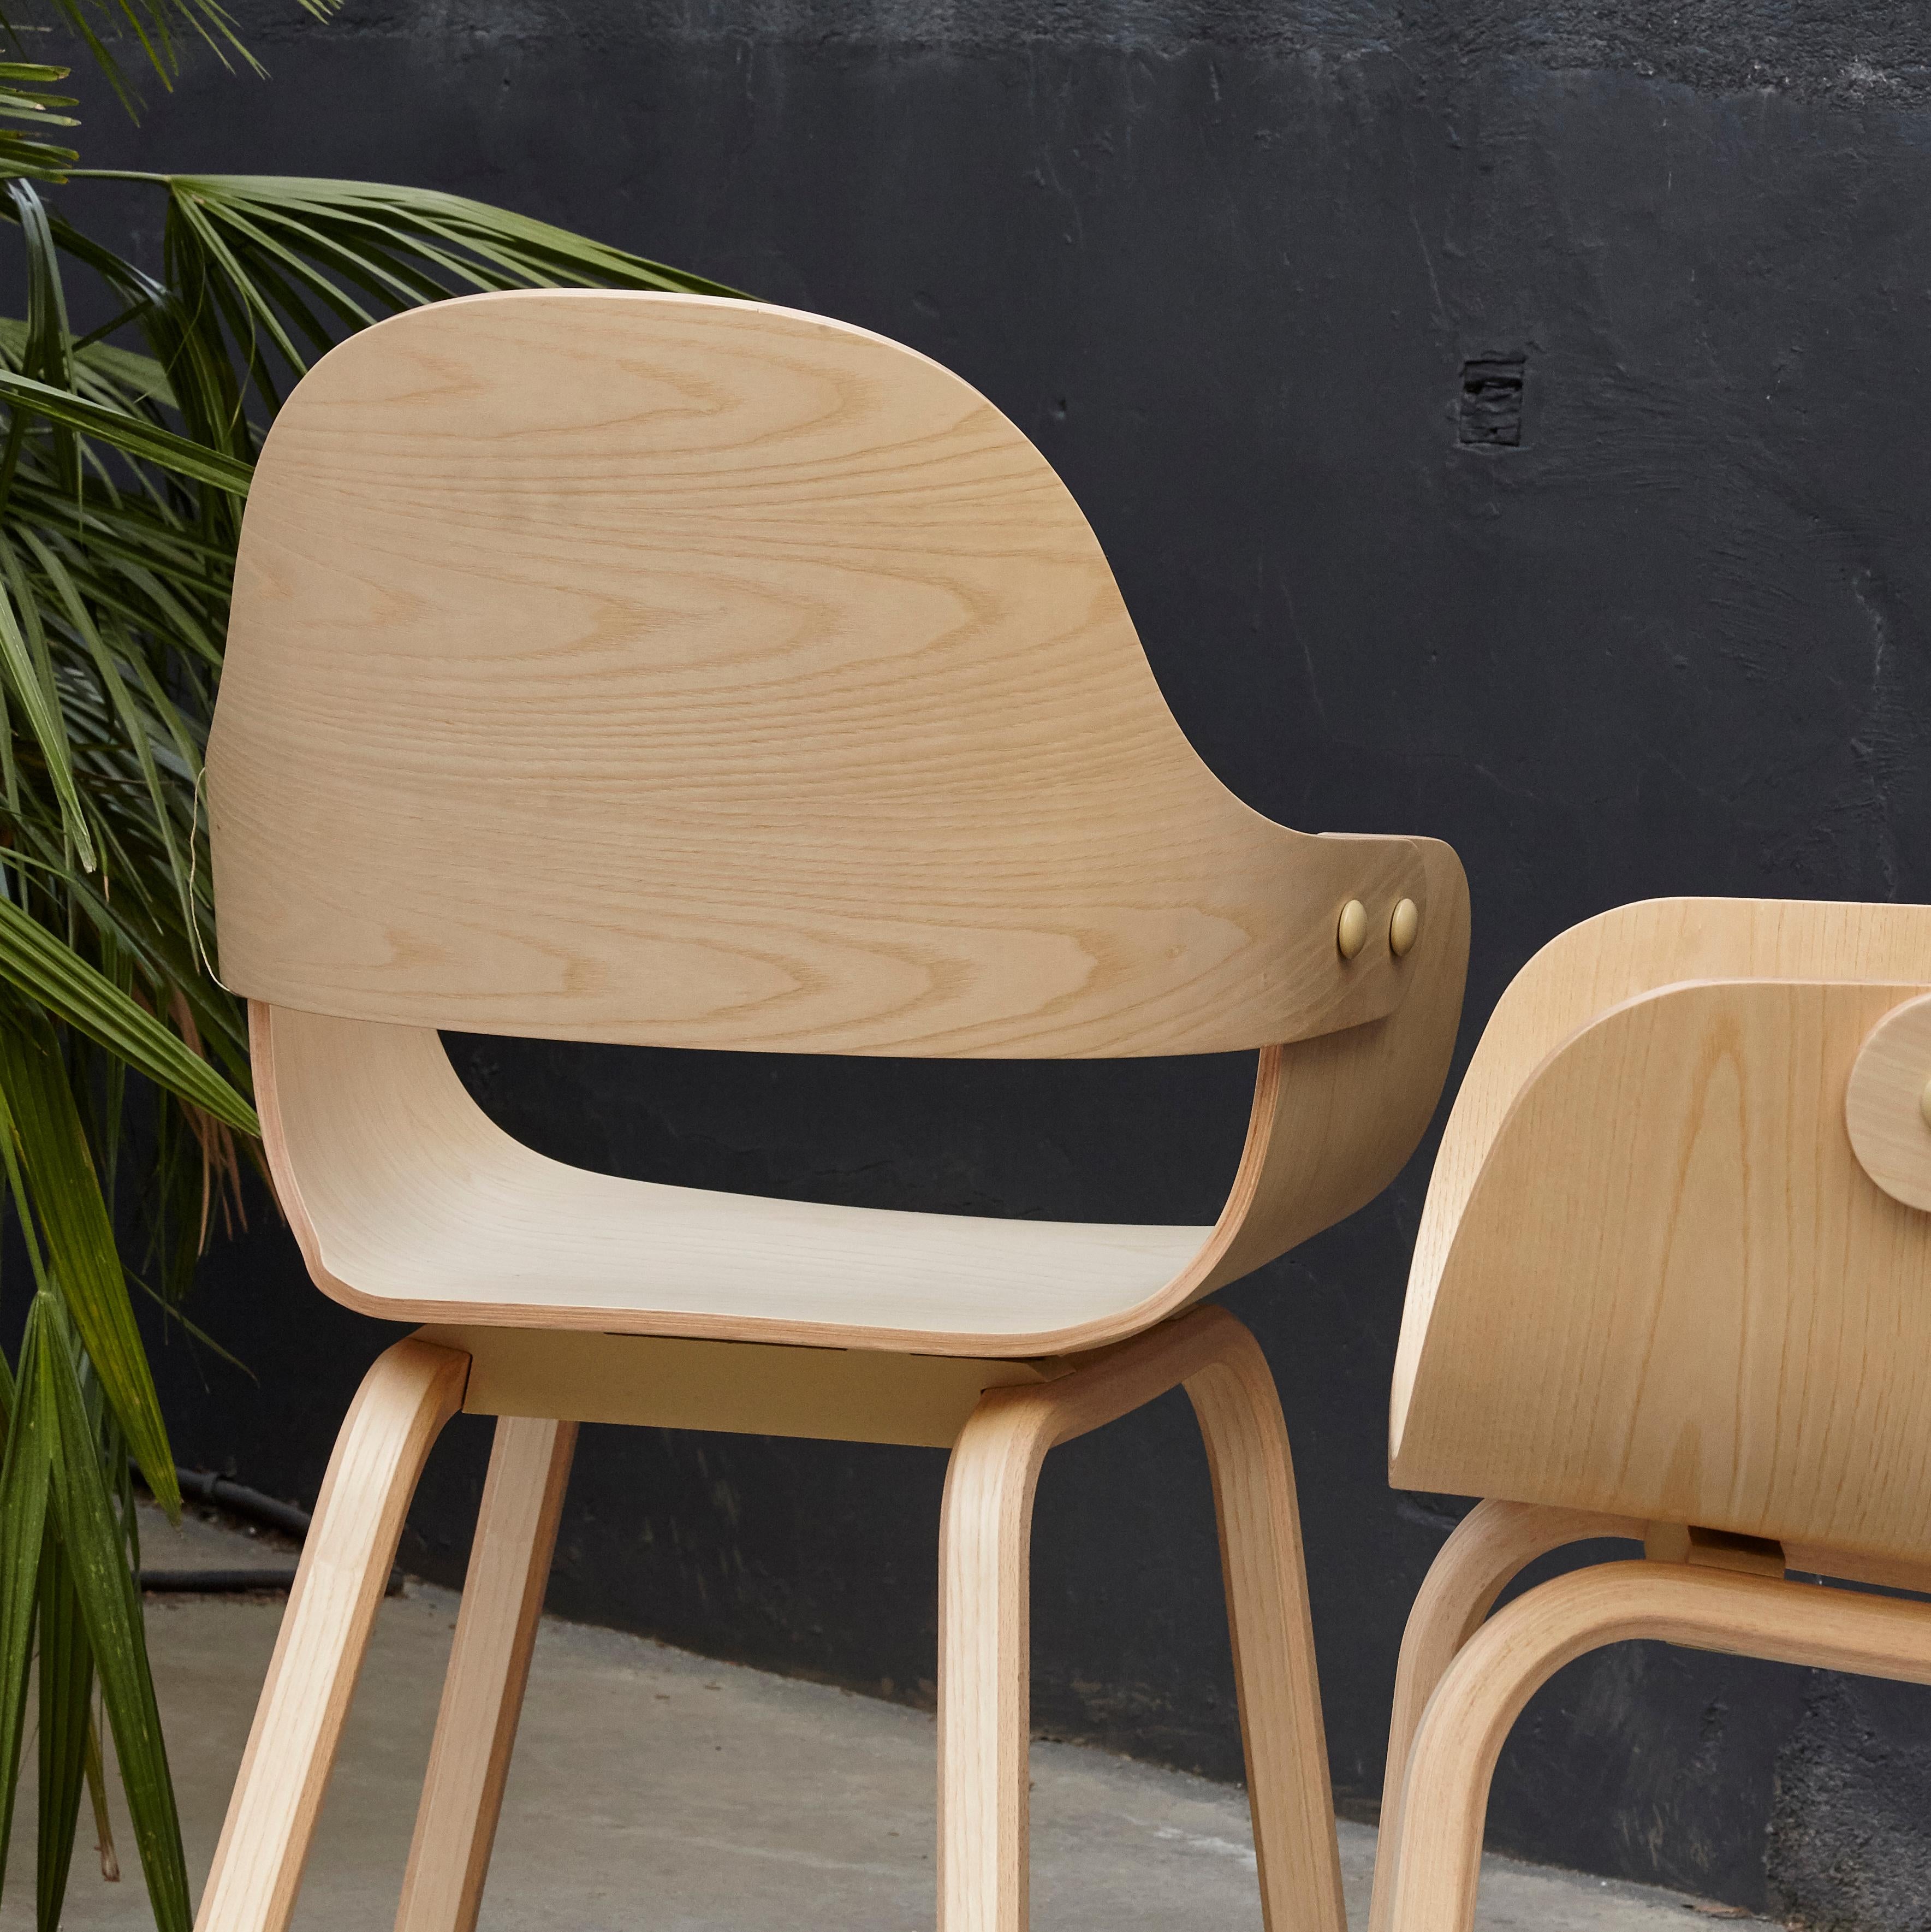 Plywood Pair of Jaime Hayon, Contemporary, Wood Chair Showtime Nude by BD Barcelona